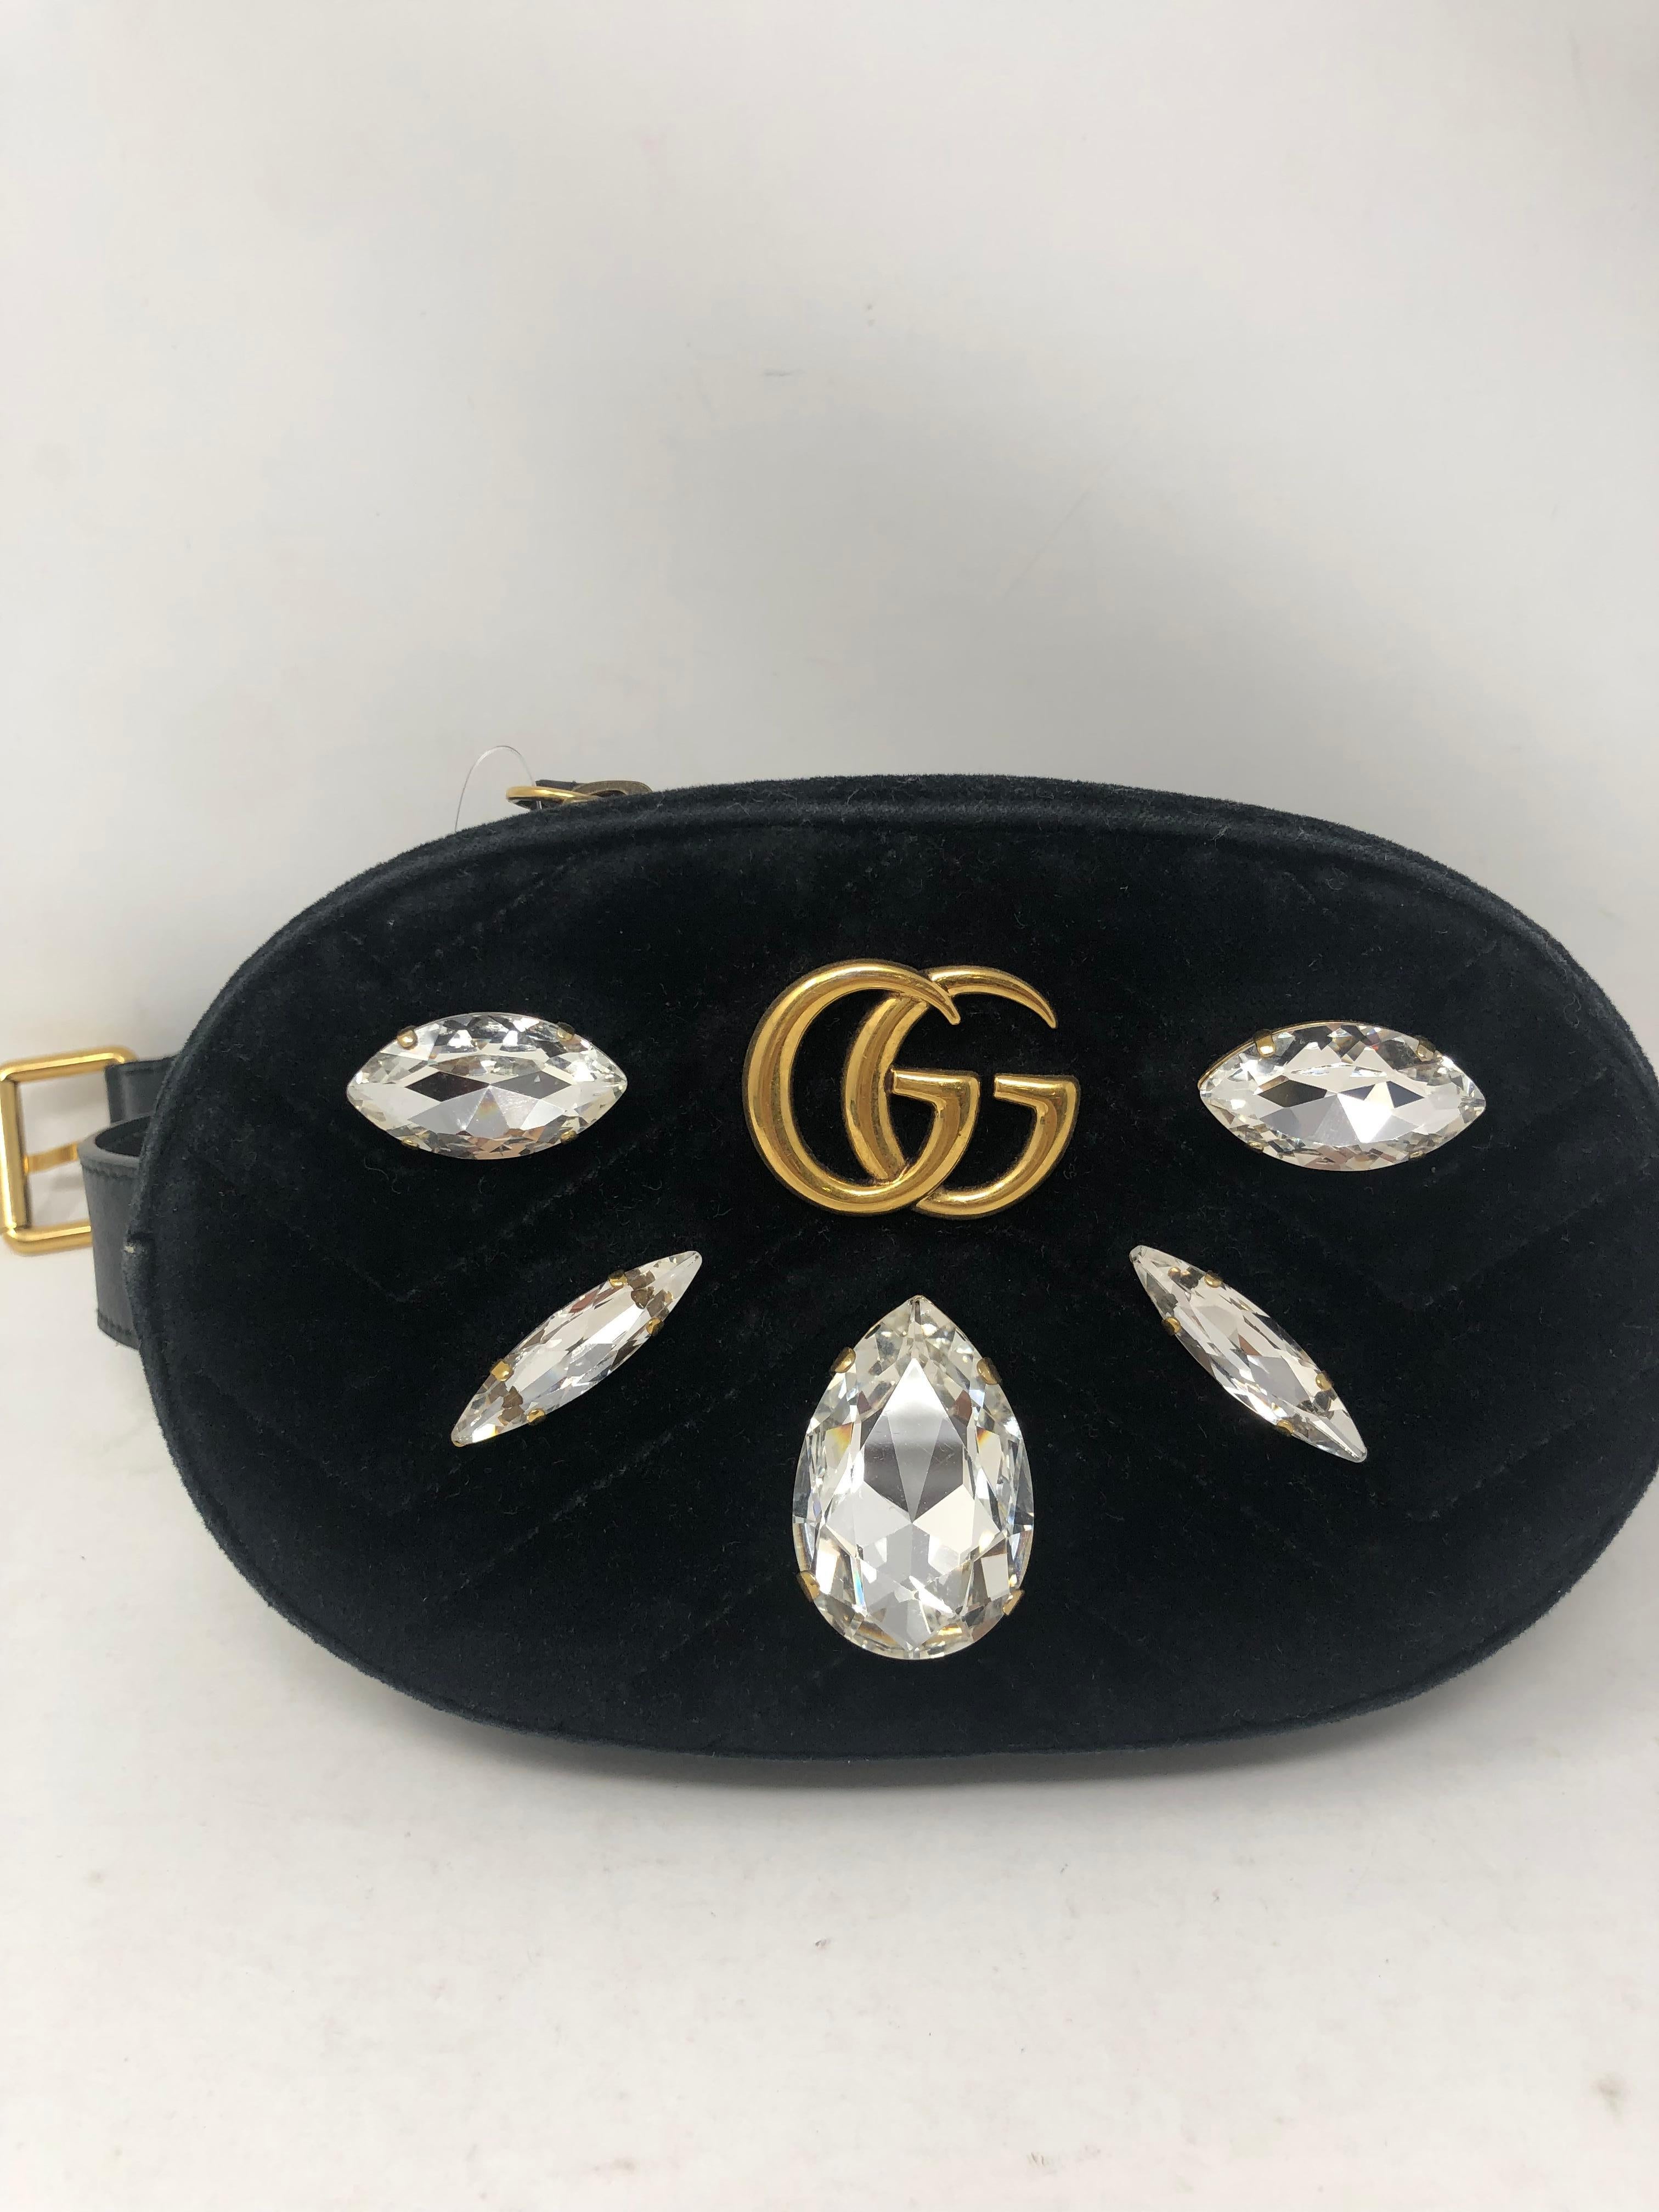 Gucci Black Velvet Crystals Bum Bag. Crystals on black velvet and leather fanny pack. Can be worn across the body too. In style, this versatile look is seen on runways. Limited and has been worn. Has some wear on corners and small dirt stains inside